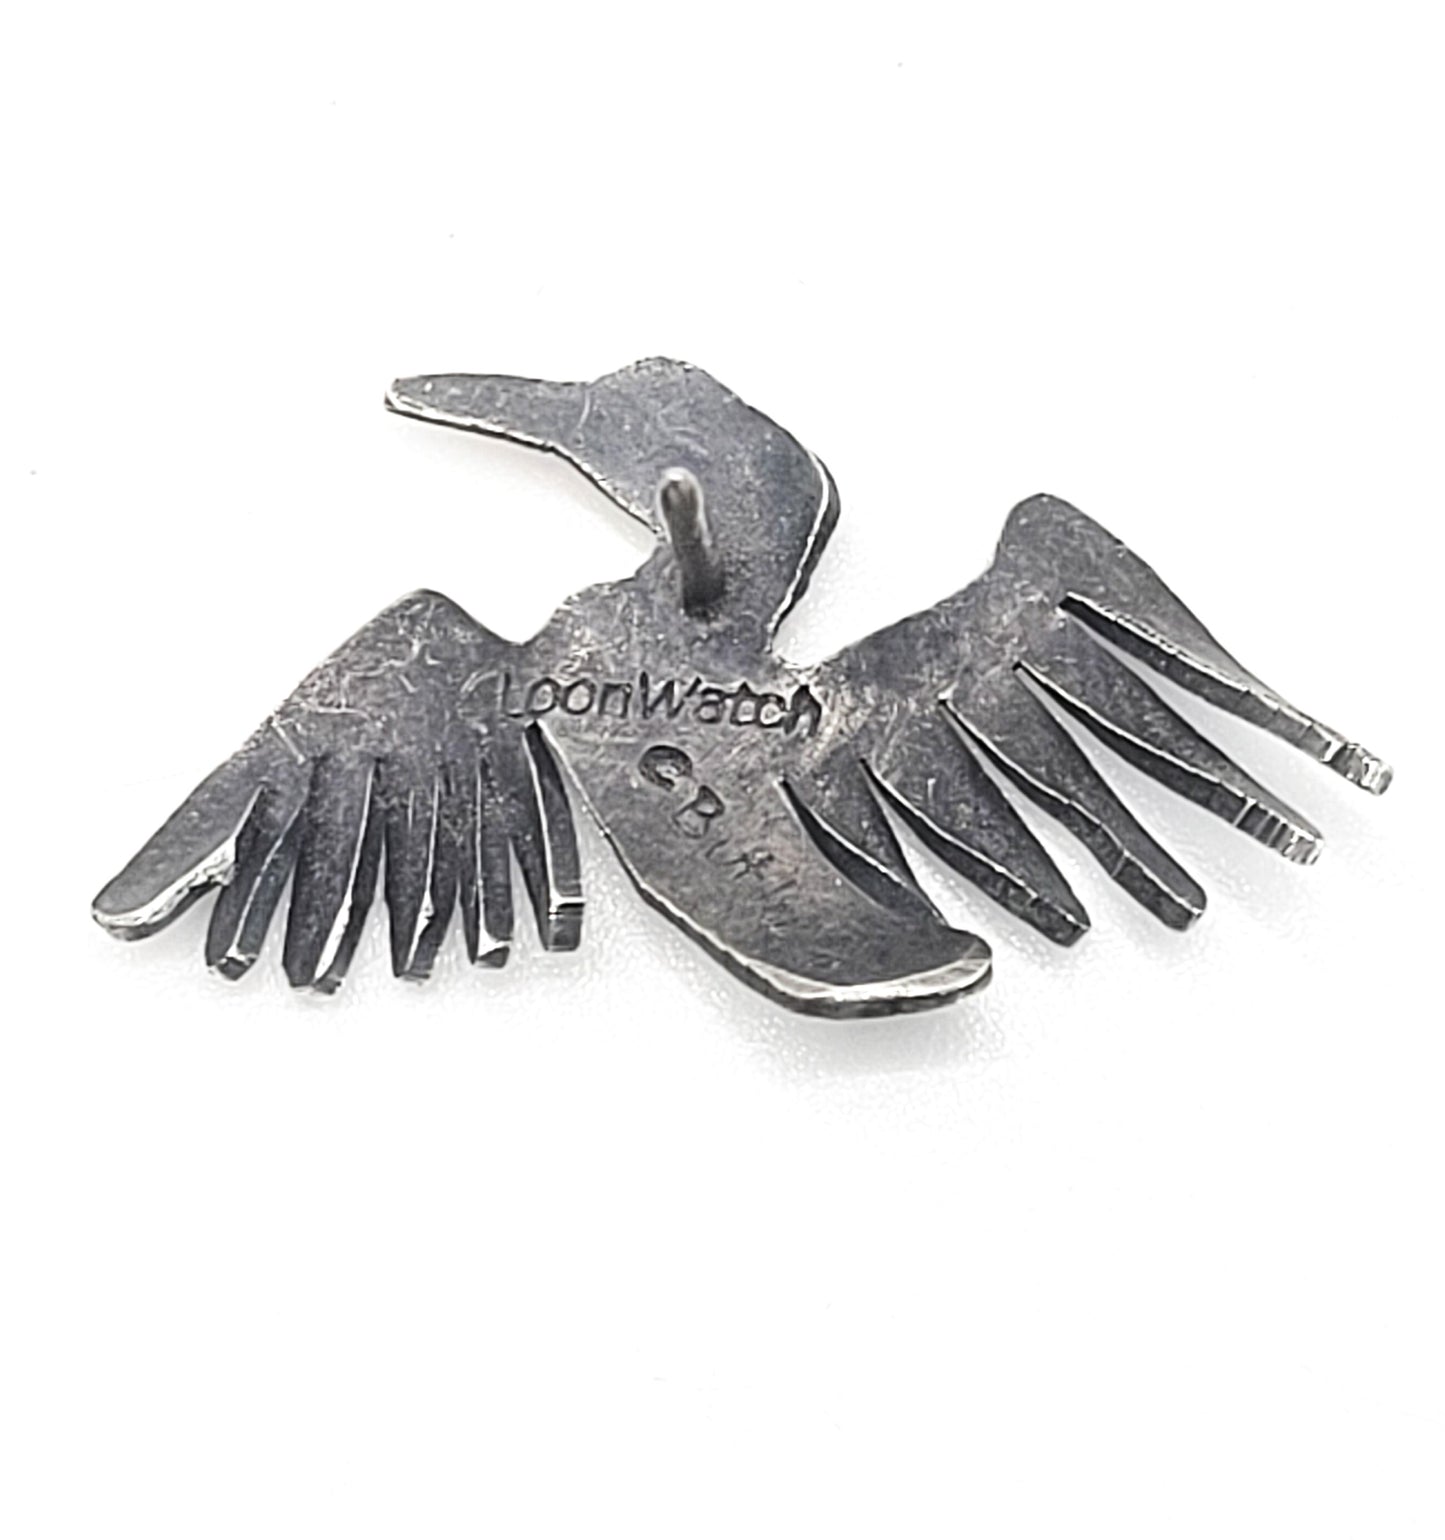 Loon watch signed C Butler vintage sterling silver flying bird tie tack brooch pin